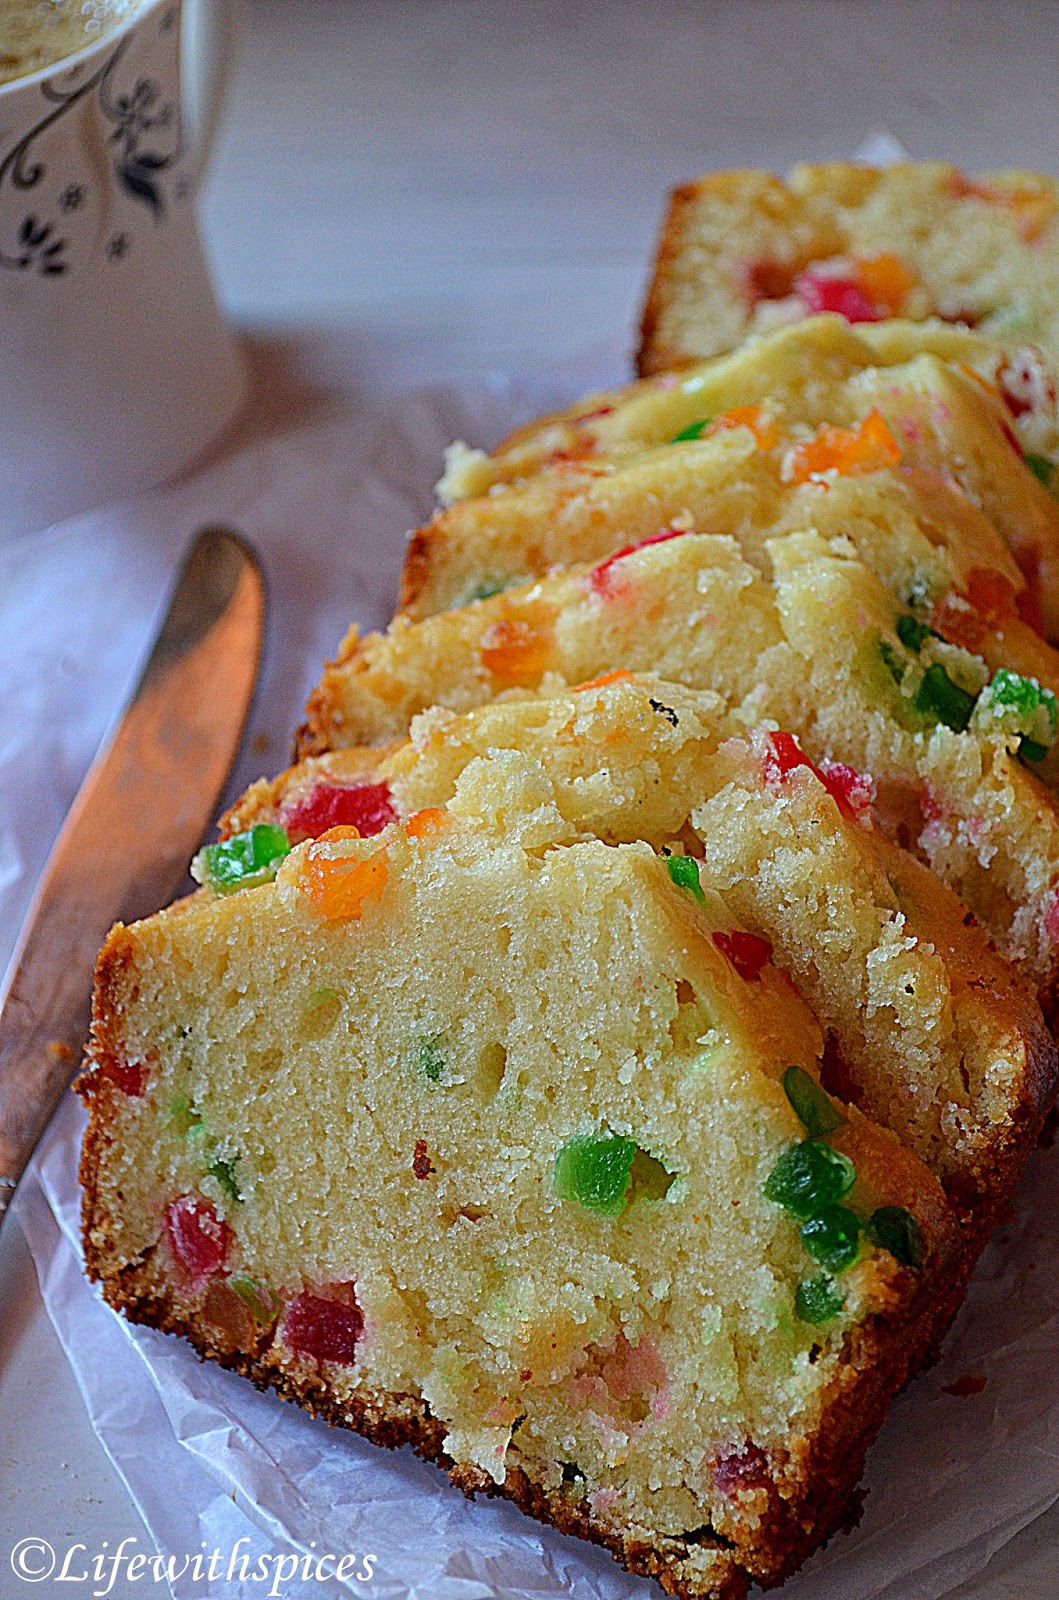 Life with spices: EGGLESS BUTTERLESS TUTTI FRUTTI CAKE